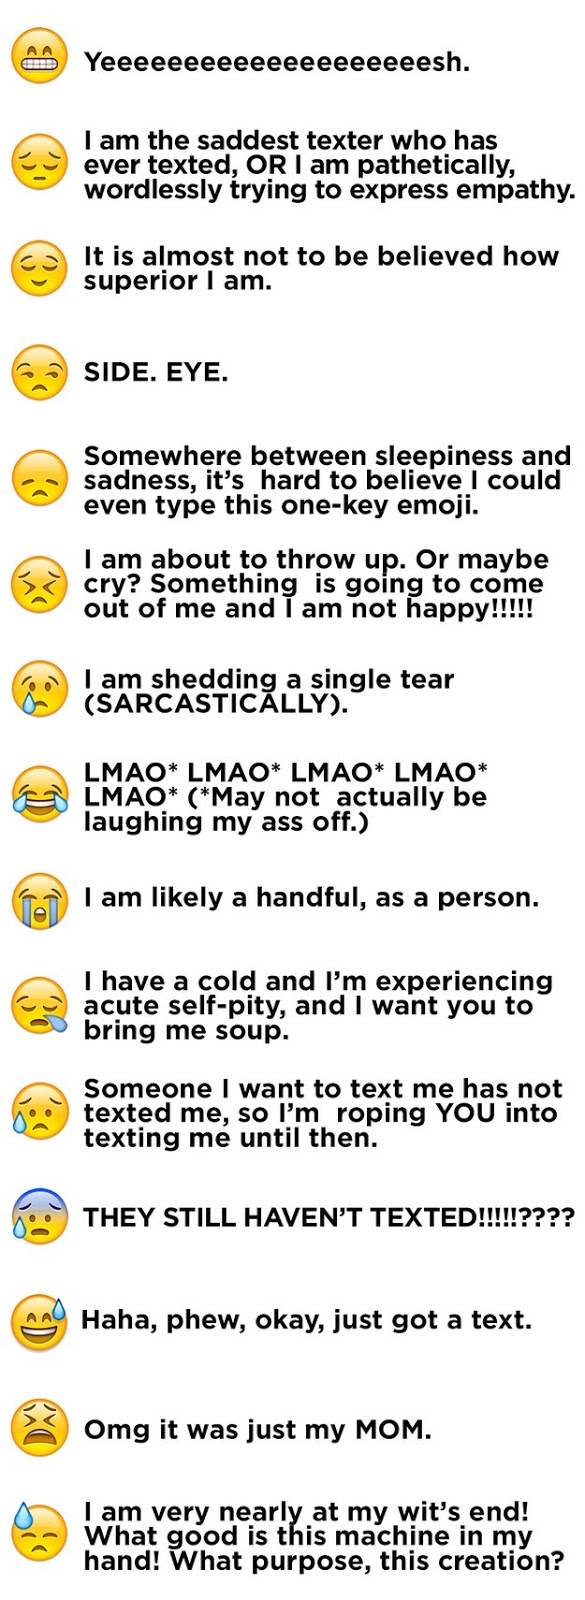 Whatsapp Smiley Emoji (Symbols) Meanings Explained Here - All Trickz World